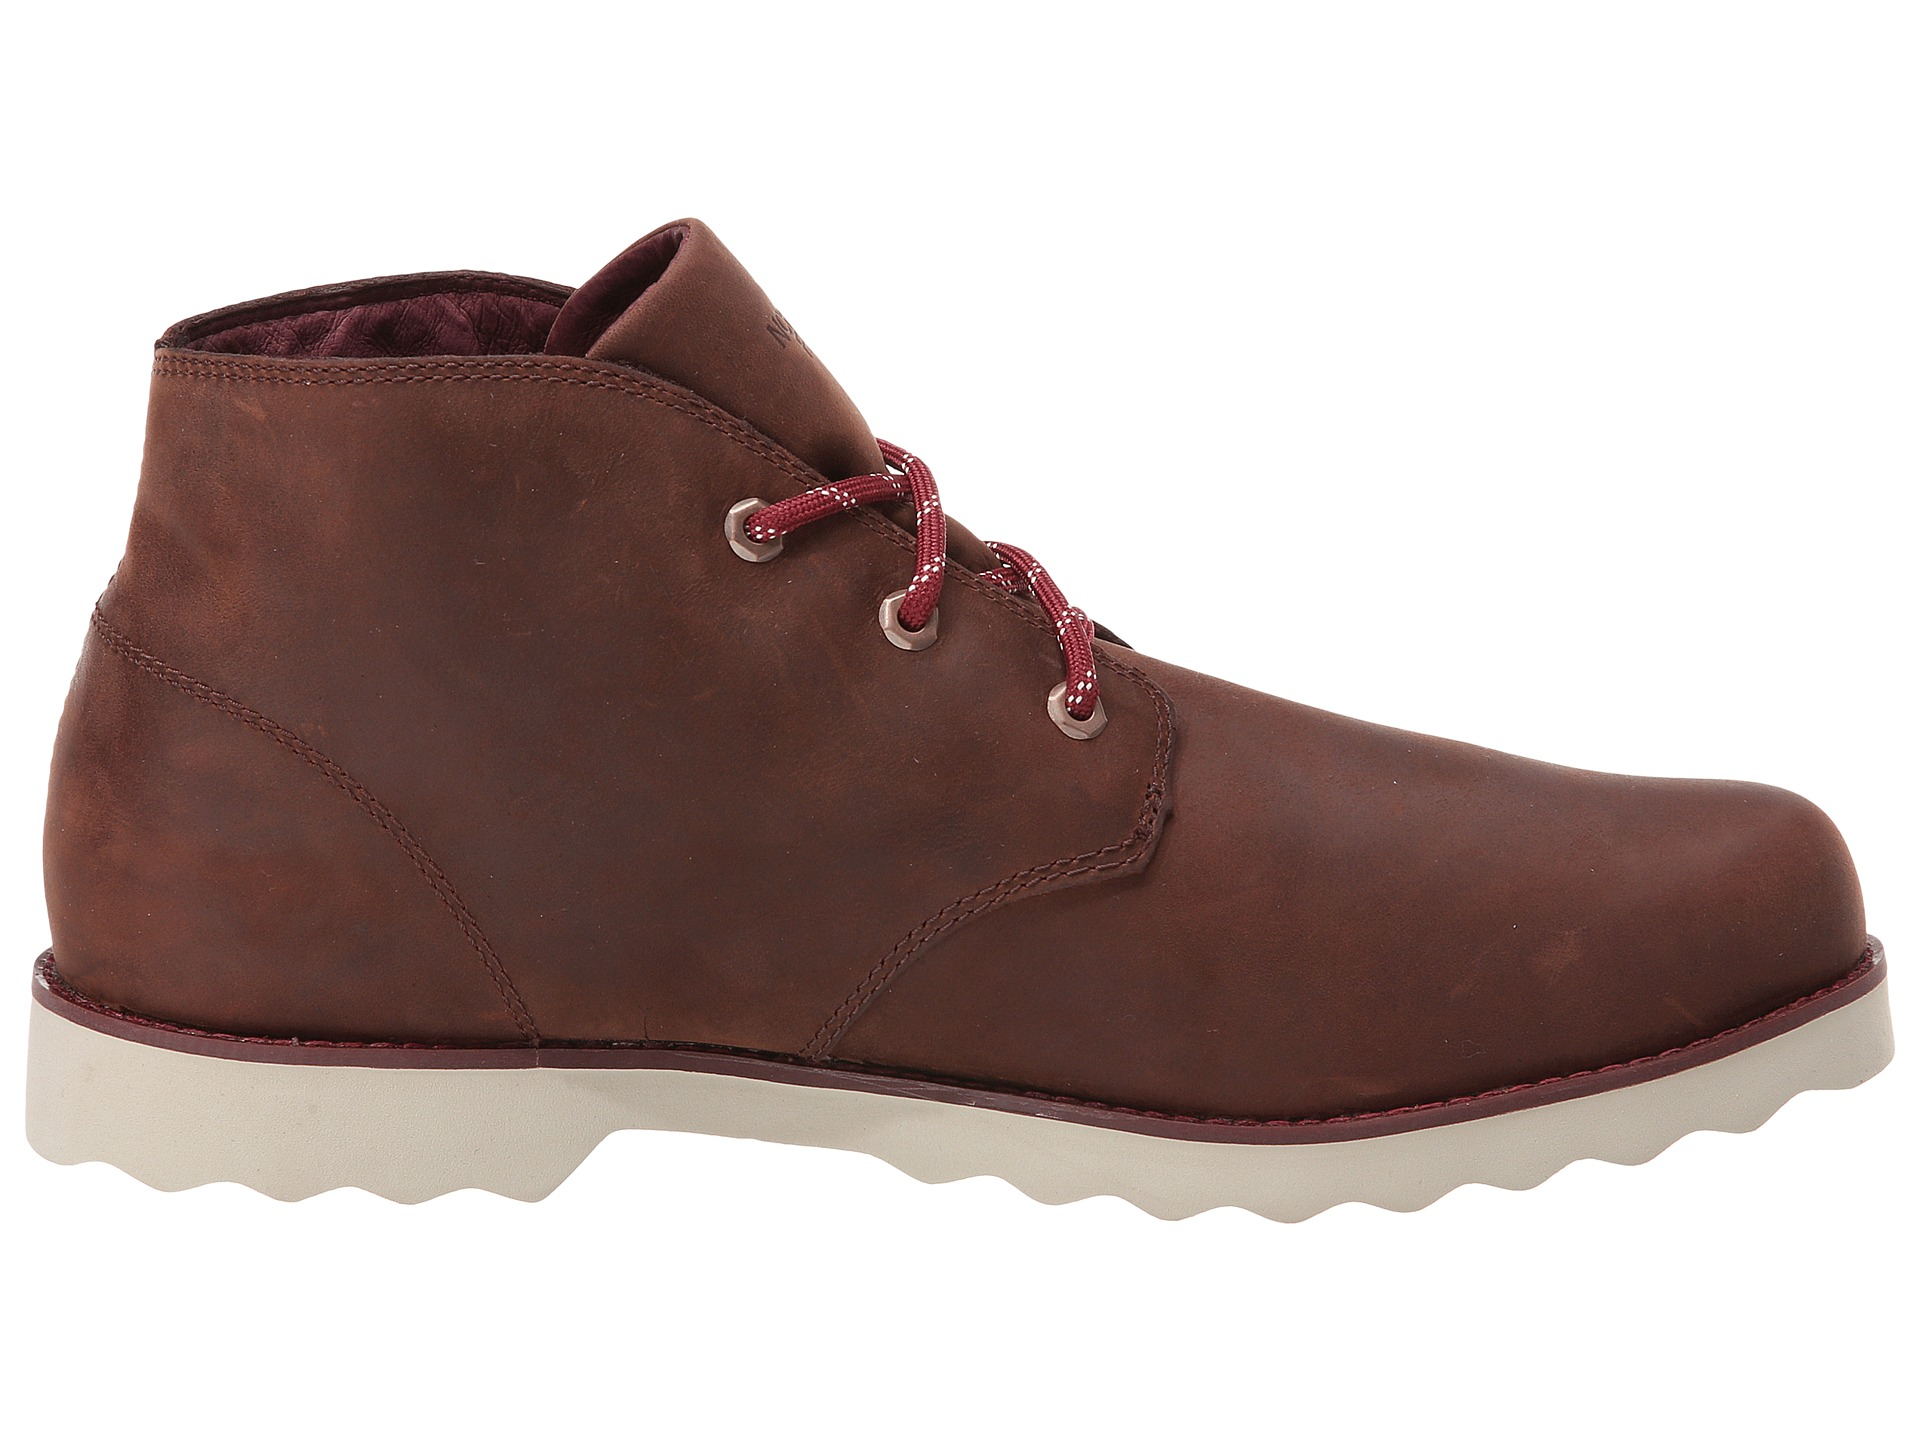 The North Face Leather Ballard Ii Chukka in Brown for Men - Lyst